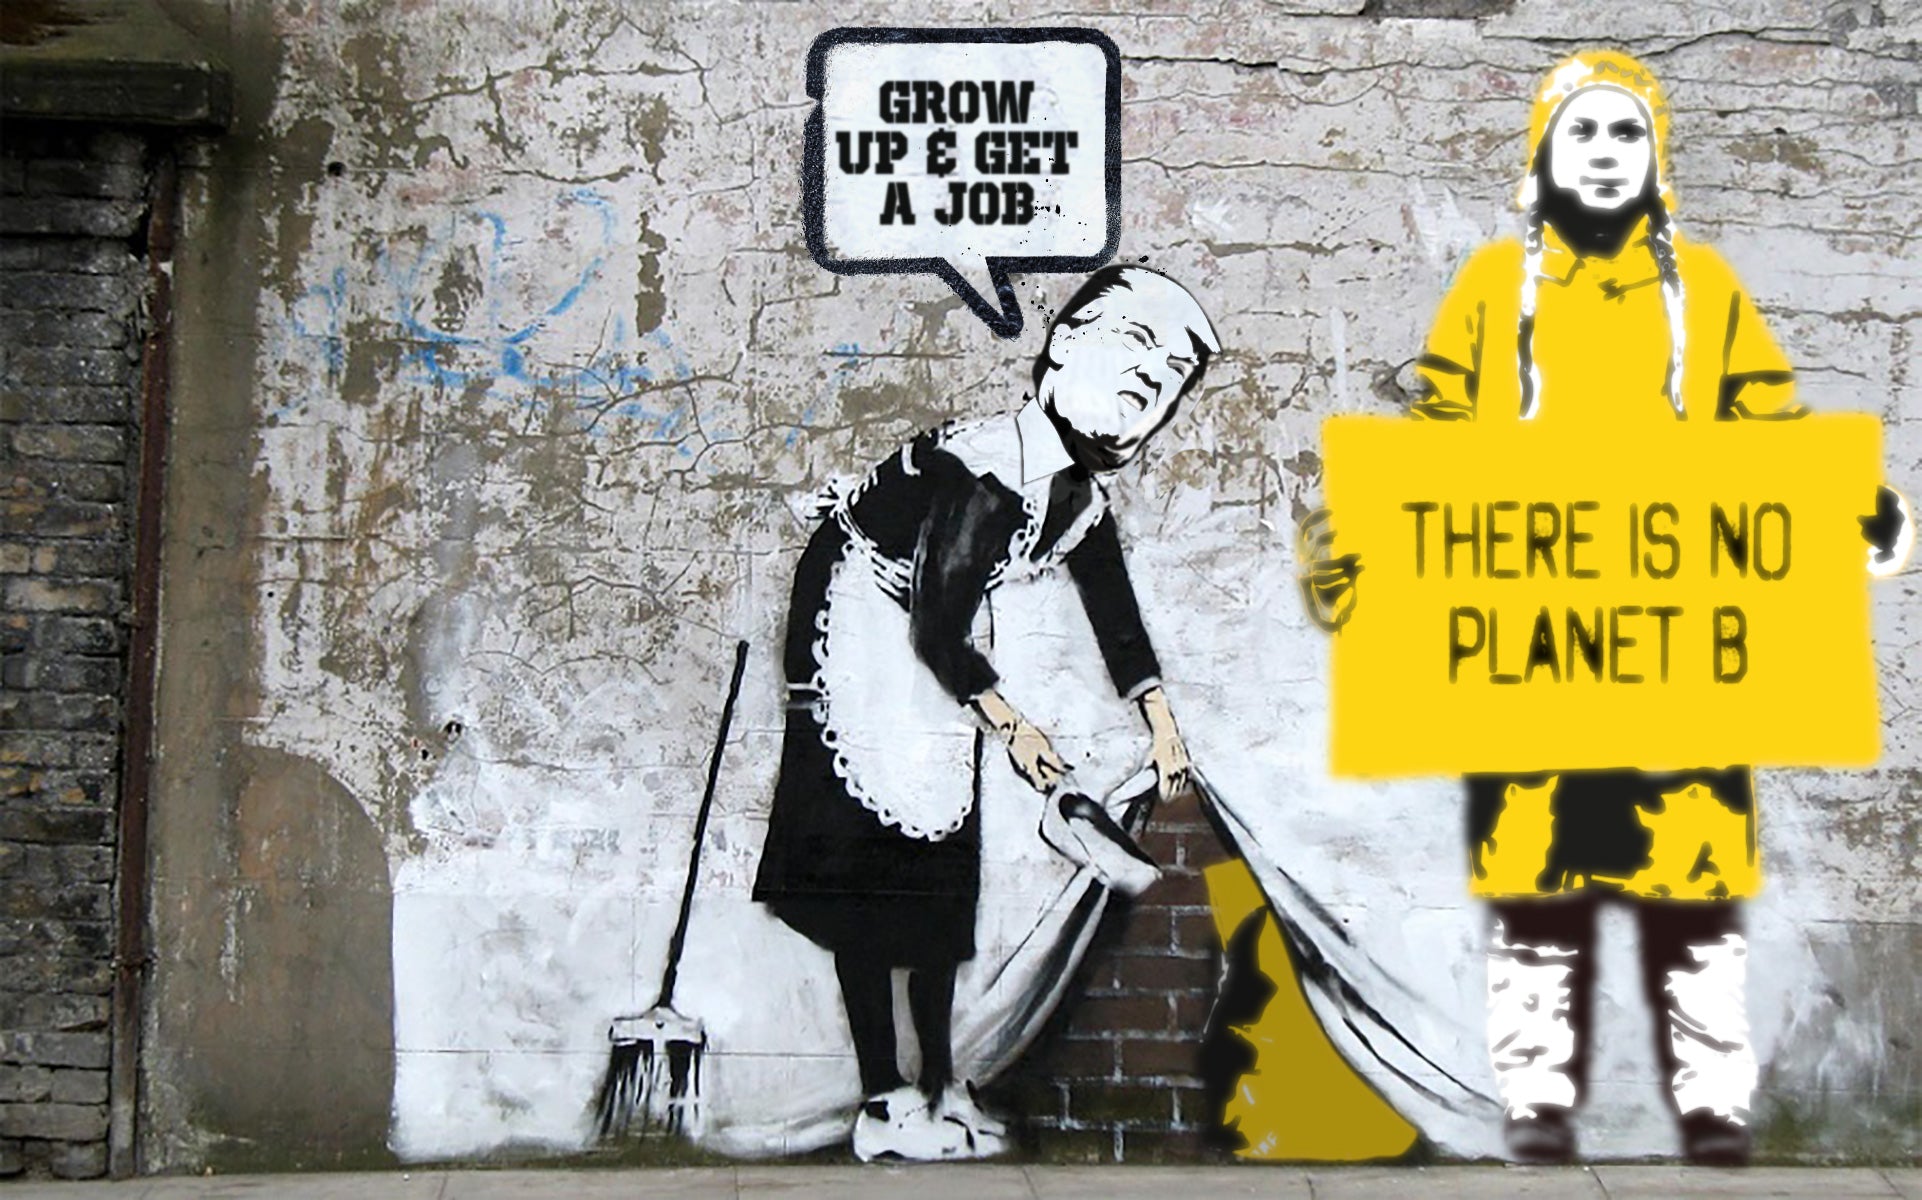 Street art of Donal Trump as a cleaning lady next to climate activist Greta Thunberg 